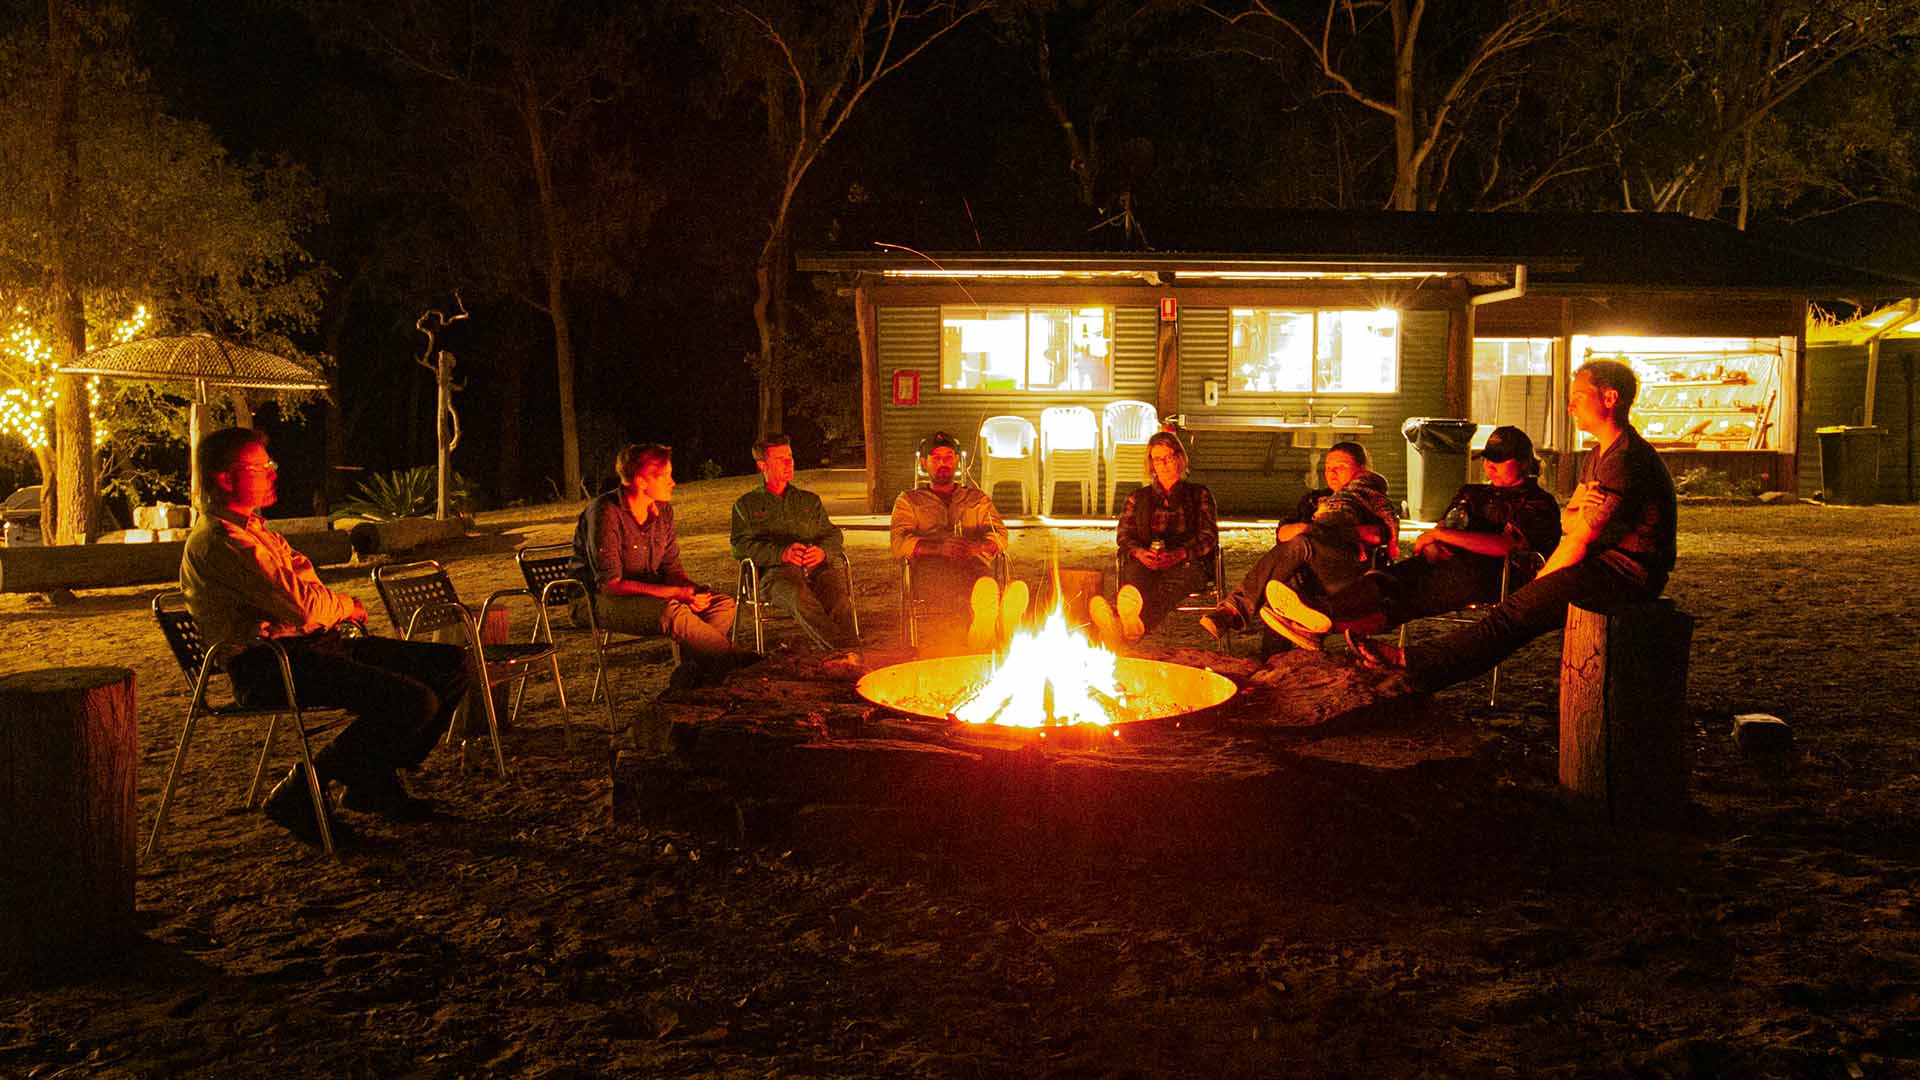 A group of people relaxing around a campfire at night